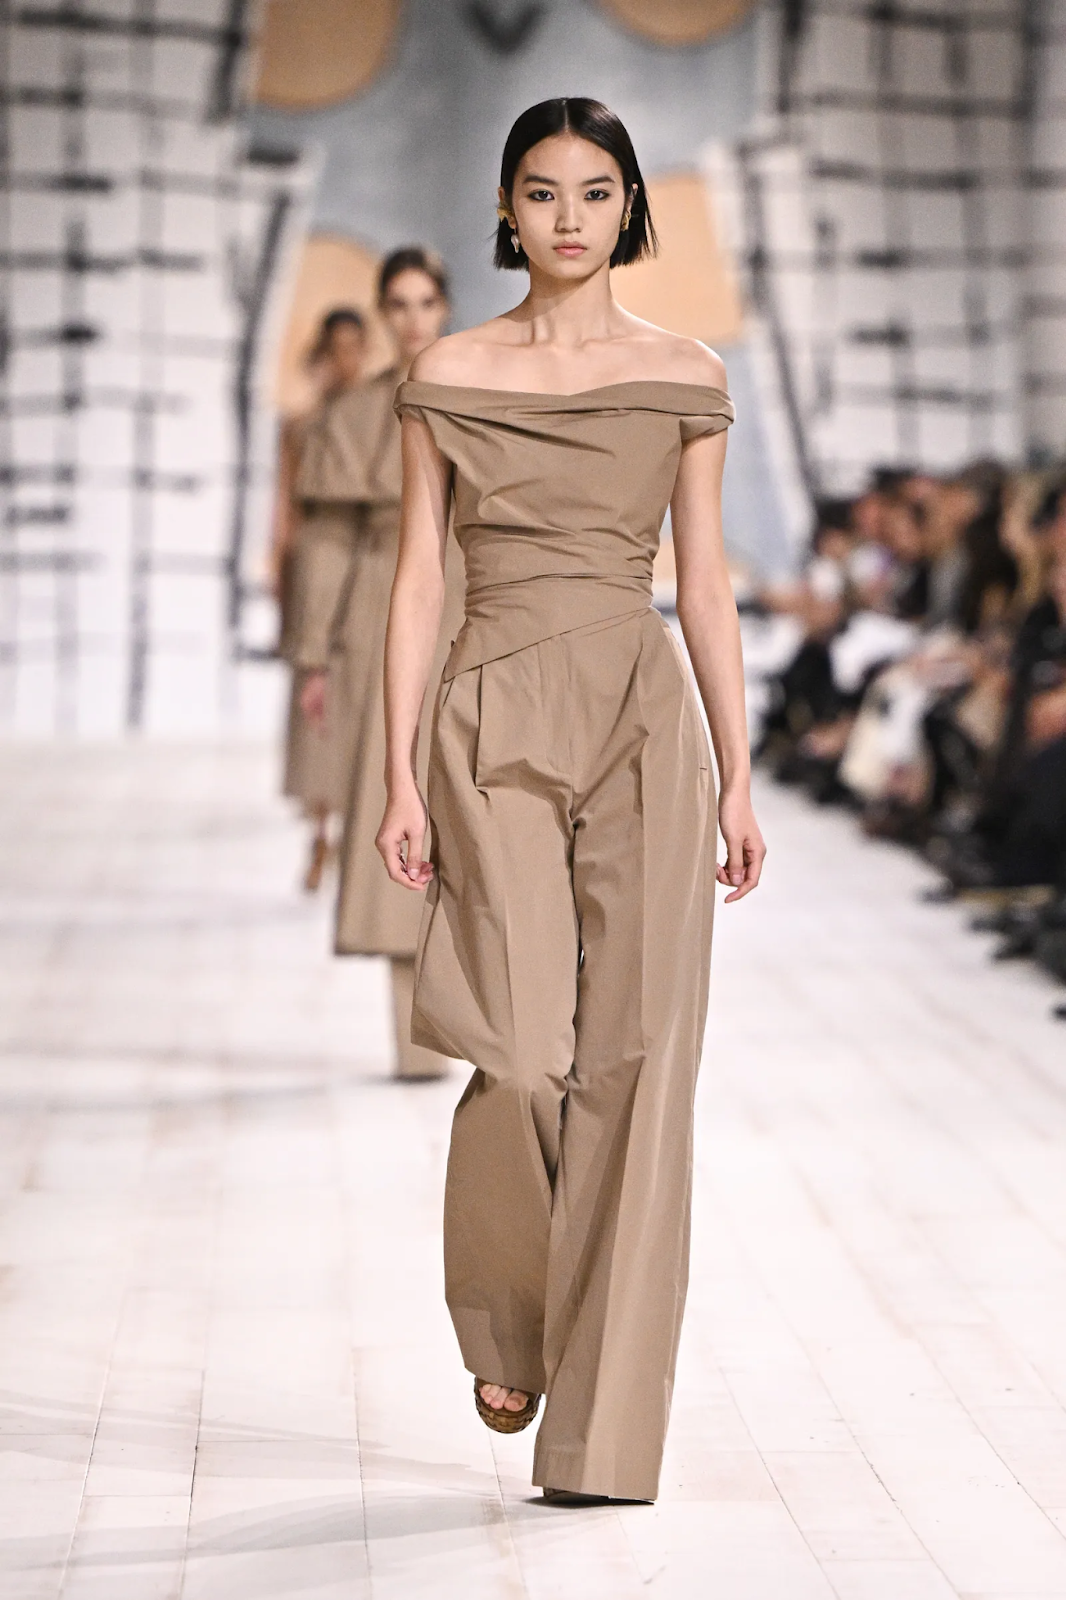 Picture showing a model in a stunning brown gown for the Dior runway